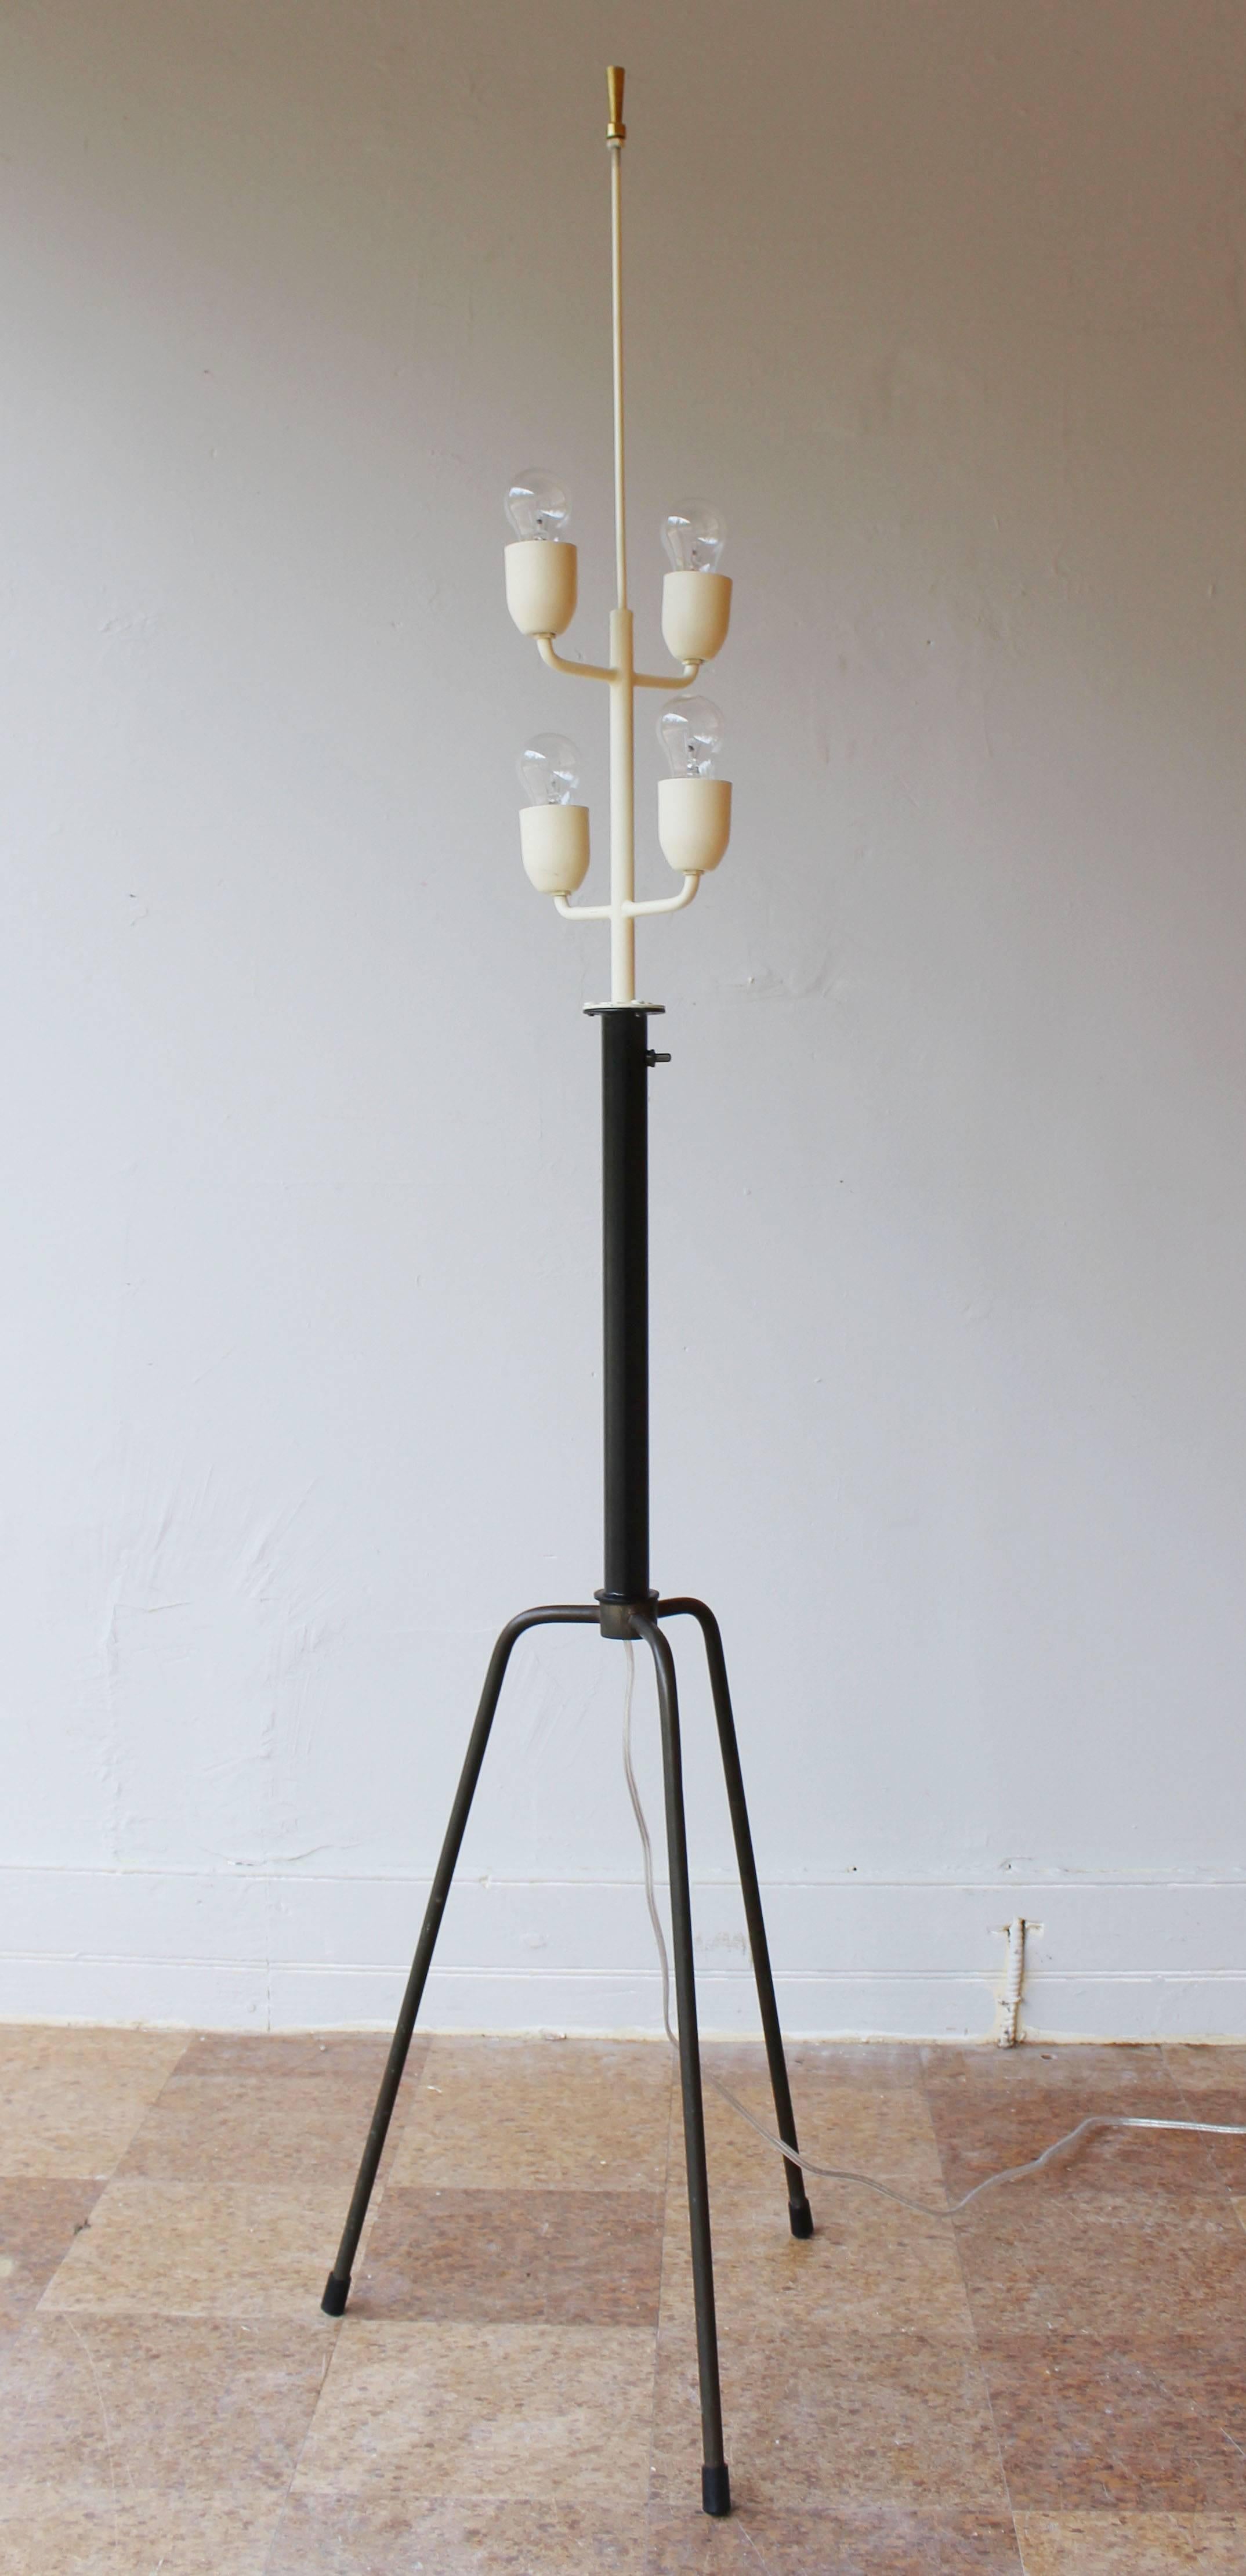 An early Italian patinaed brass and enameled metal floor lamp with 4 sockets.

restored and rewired.